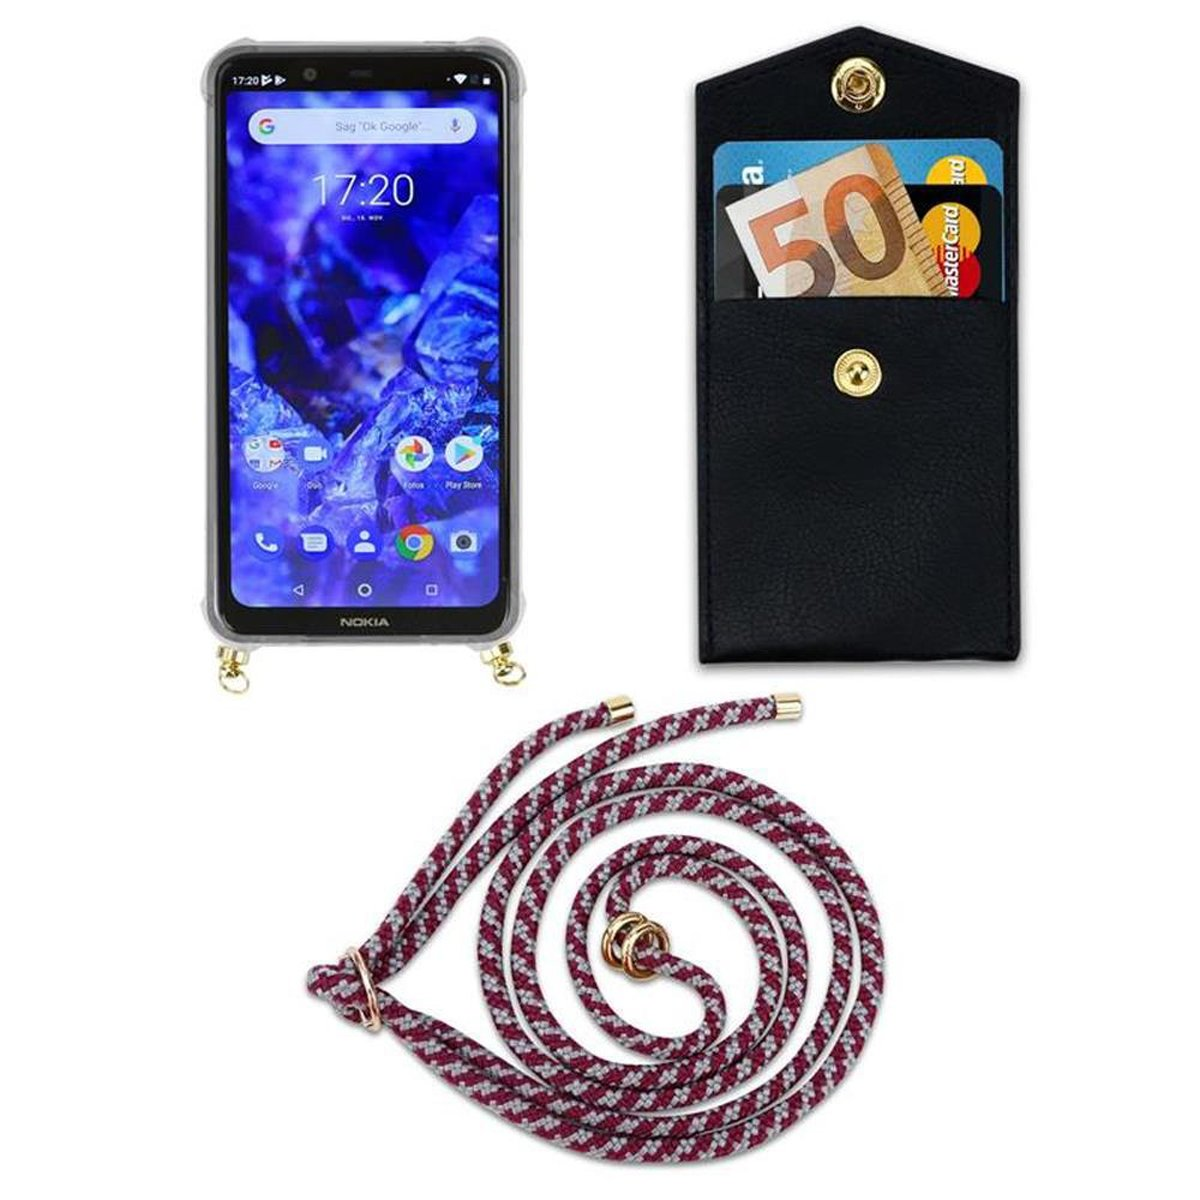 Hülle, Handy Backcover, / PLUS Band und abnehmbarer Kordel Gold Ringen, CADORABO X5, 5.1 mit ROT WEIß Kette Nokia,